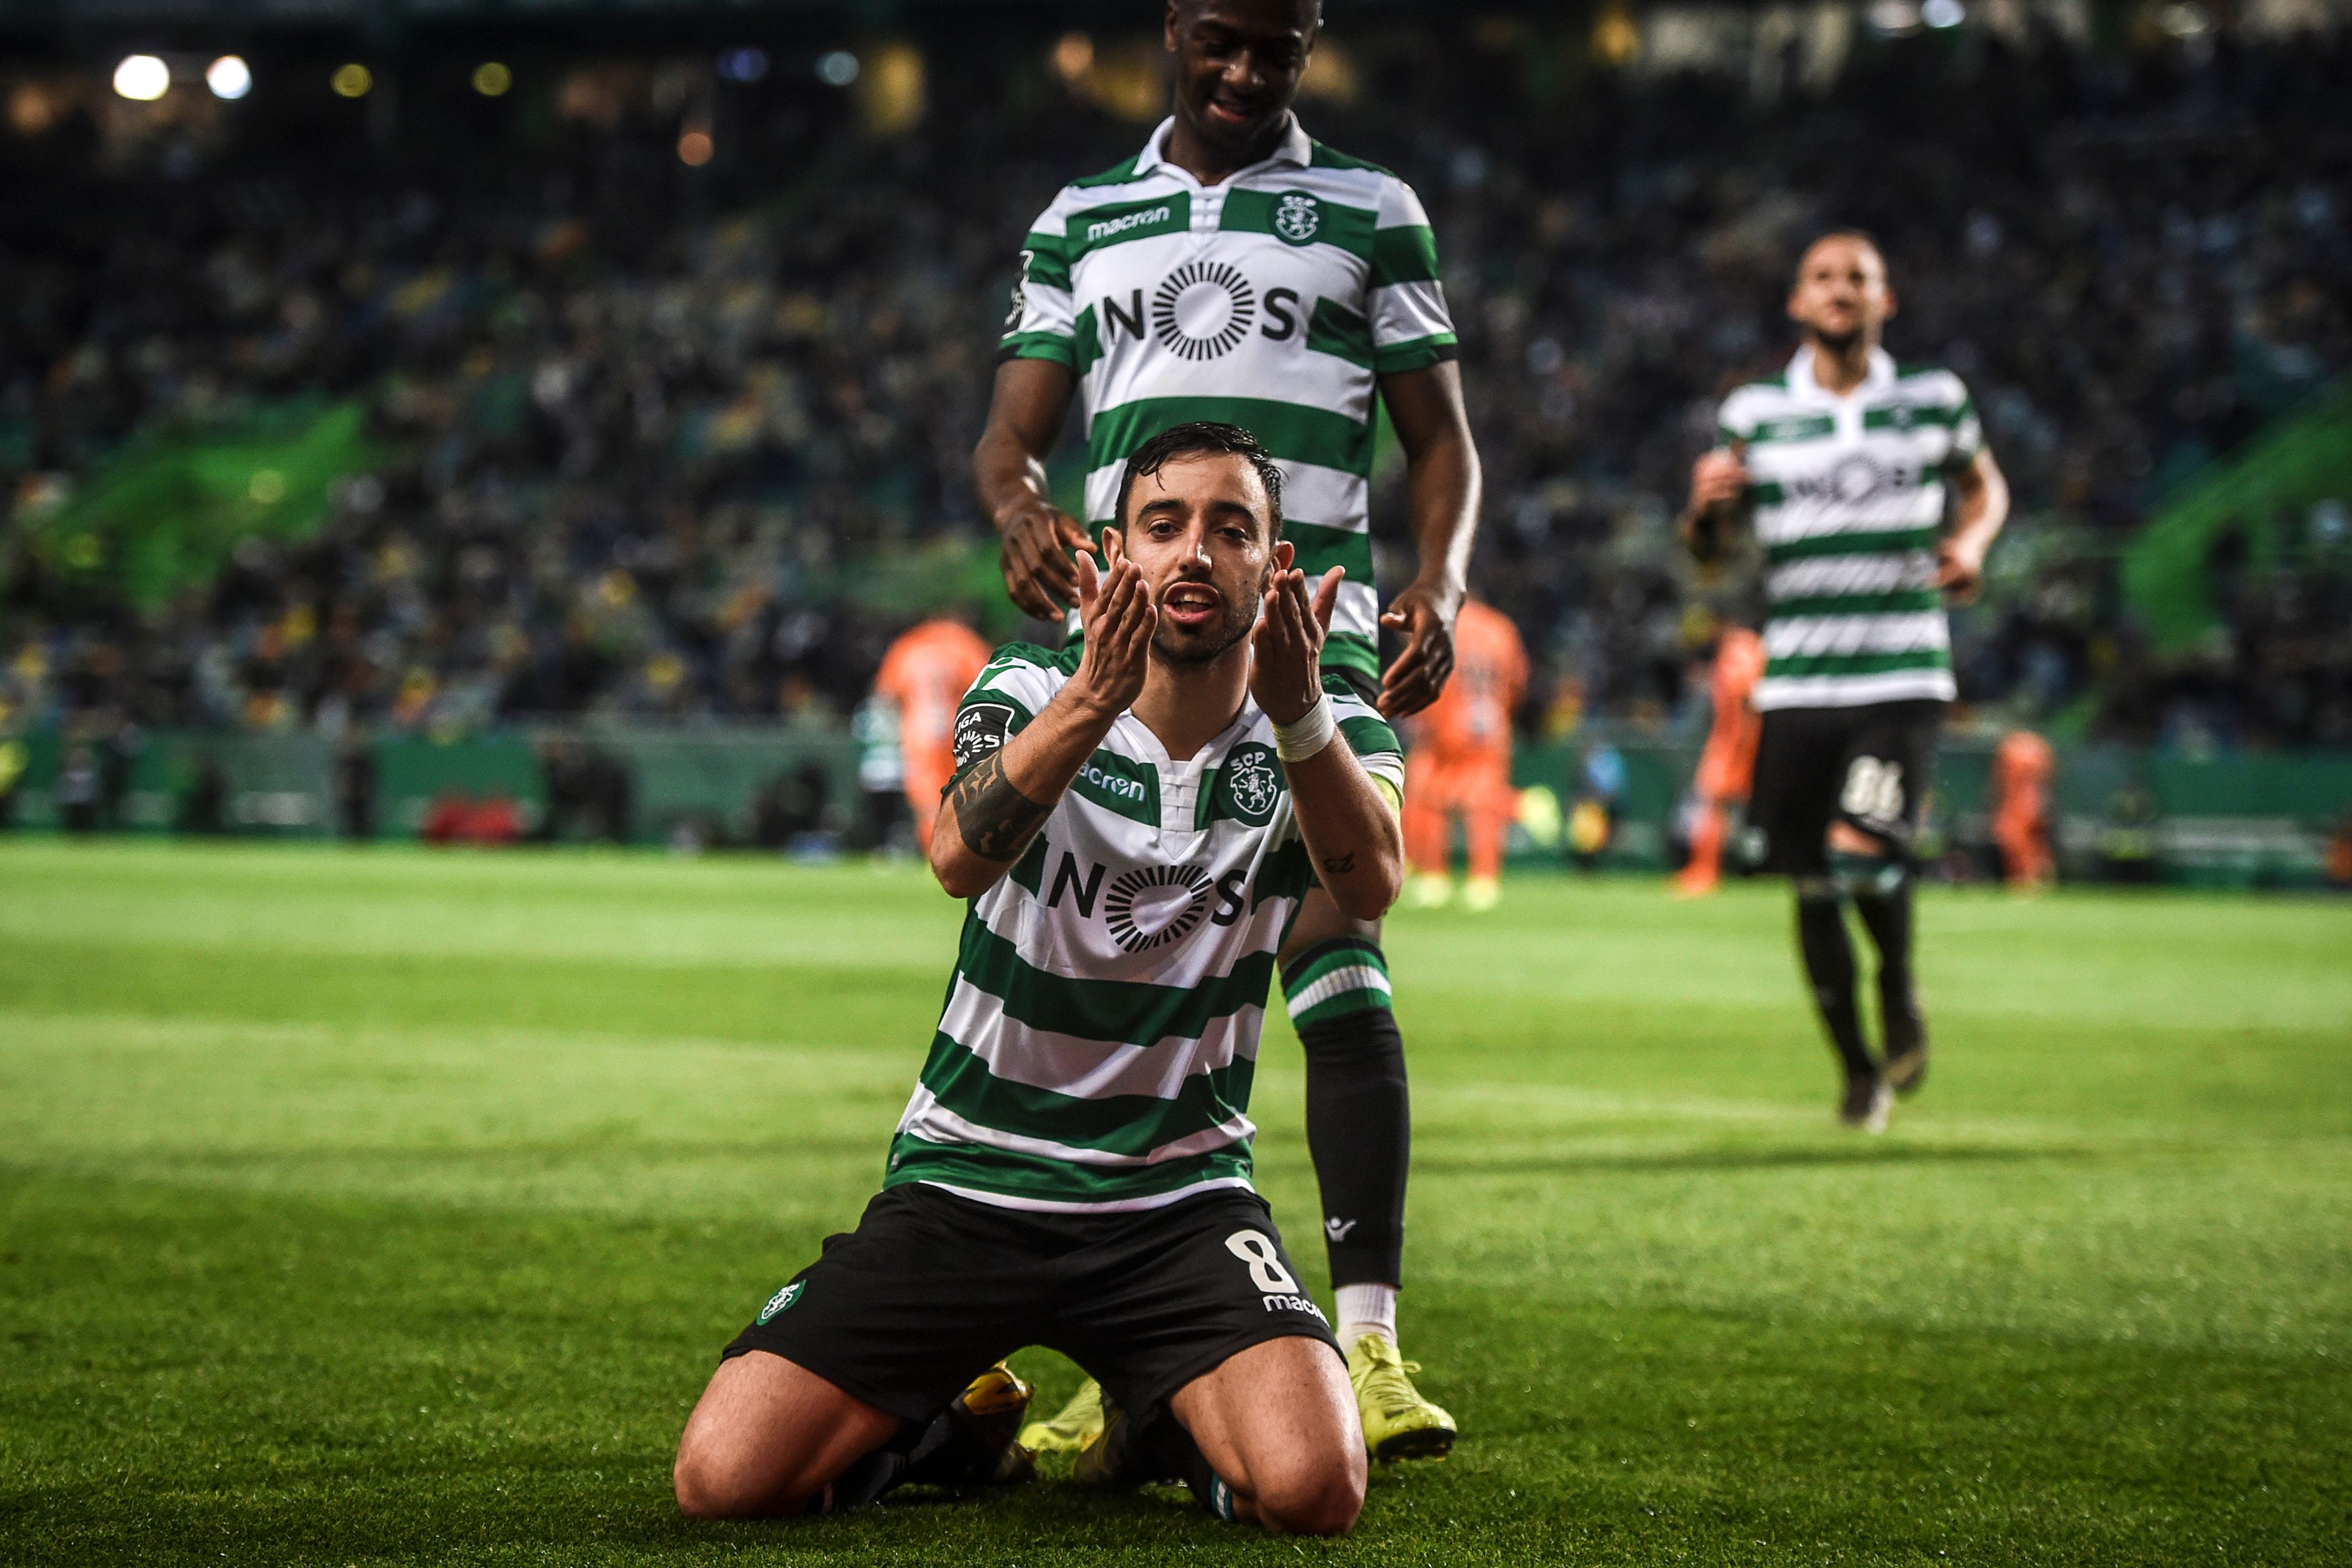 Sporting's Portuguese midfielder Bruno Fernandes (front) celebrates after scoring a goal during the Portuguese league football match between Sporting CP and Portimonense SC at the Jose Alvalade stadium in Lisbon on March 3, 2019. (Photo by PATRICIA DE MELO MOREIRA / AFP)        (Photo credit should read PATRICIA DE MELO MOREIRA/AFP/Getty Images)